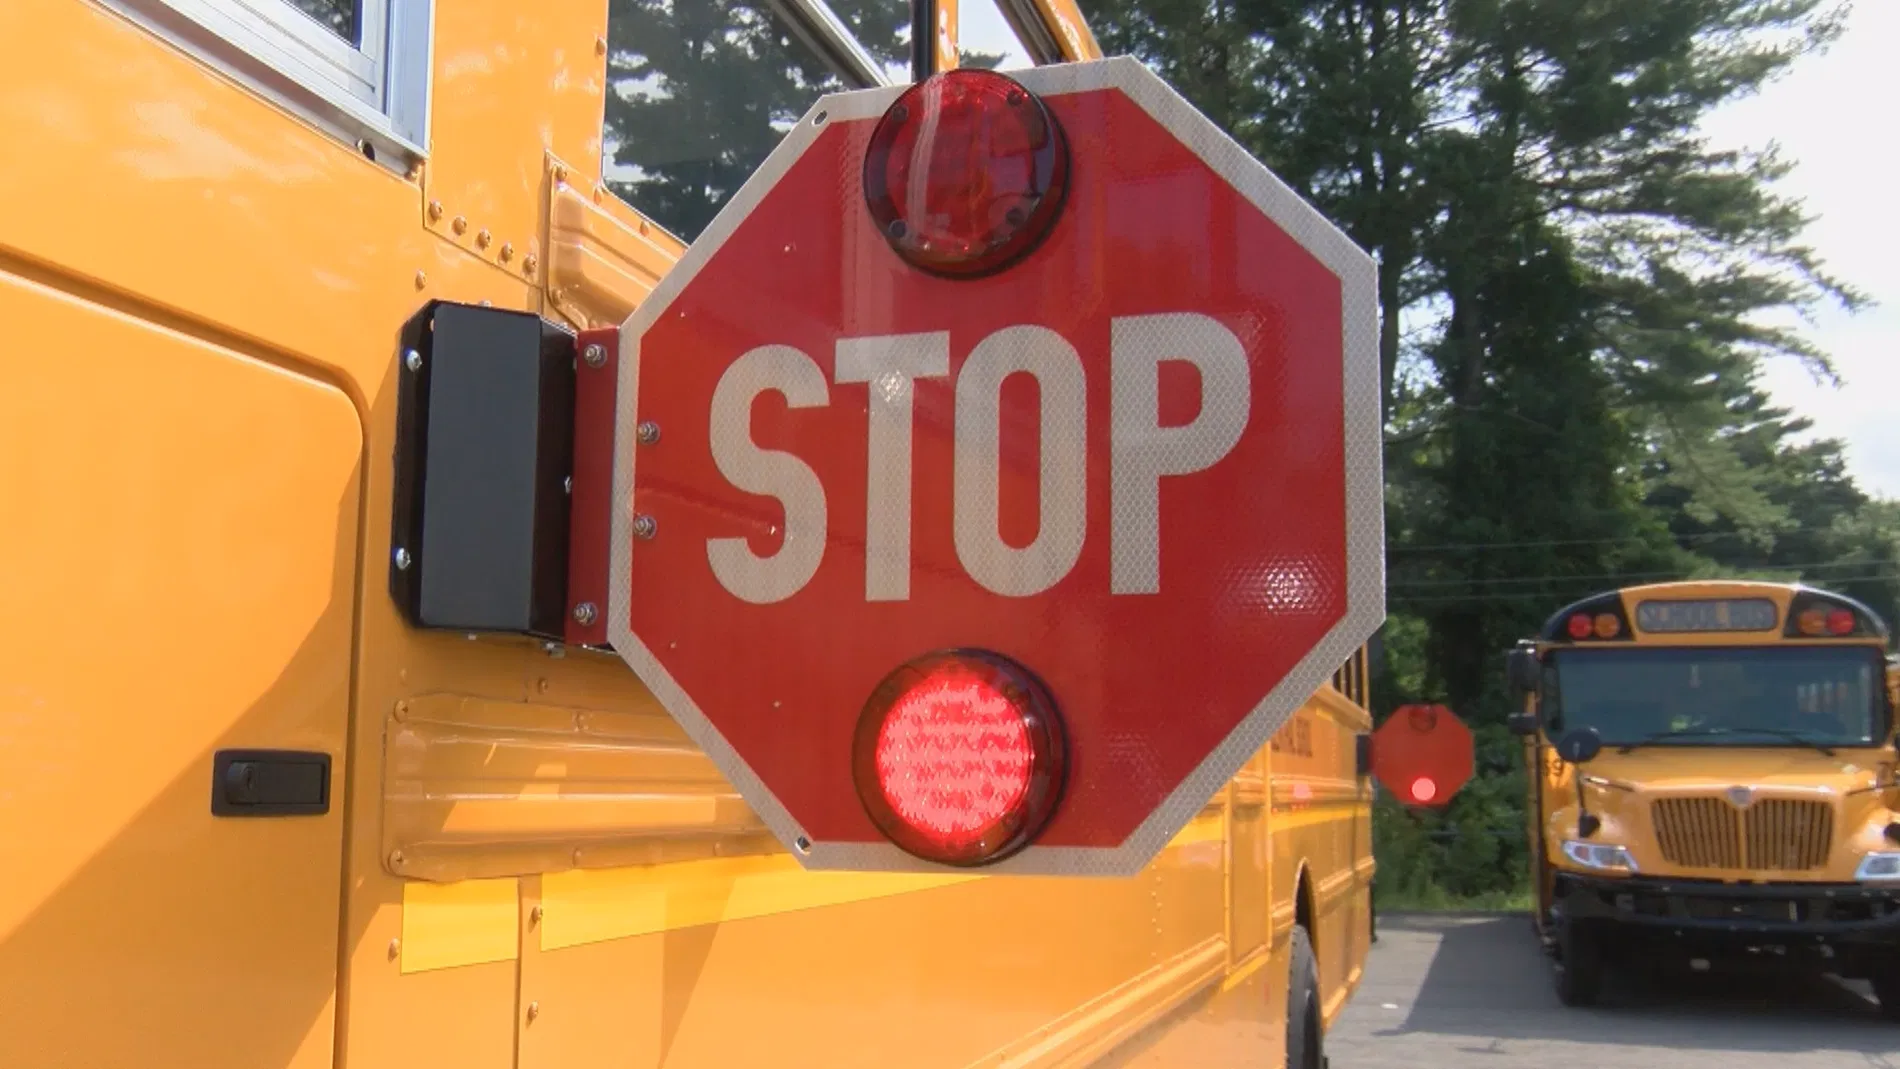 Hochul Hits the Gas on School Bus Driver Shortage - Skips 'Under the Hood' Test